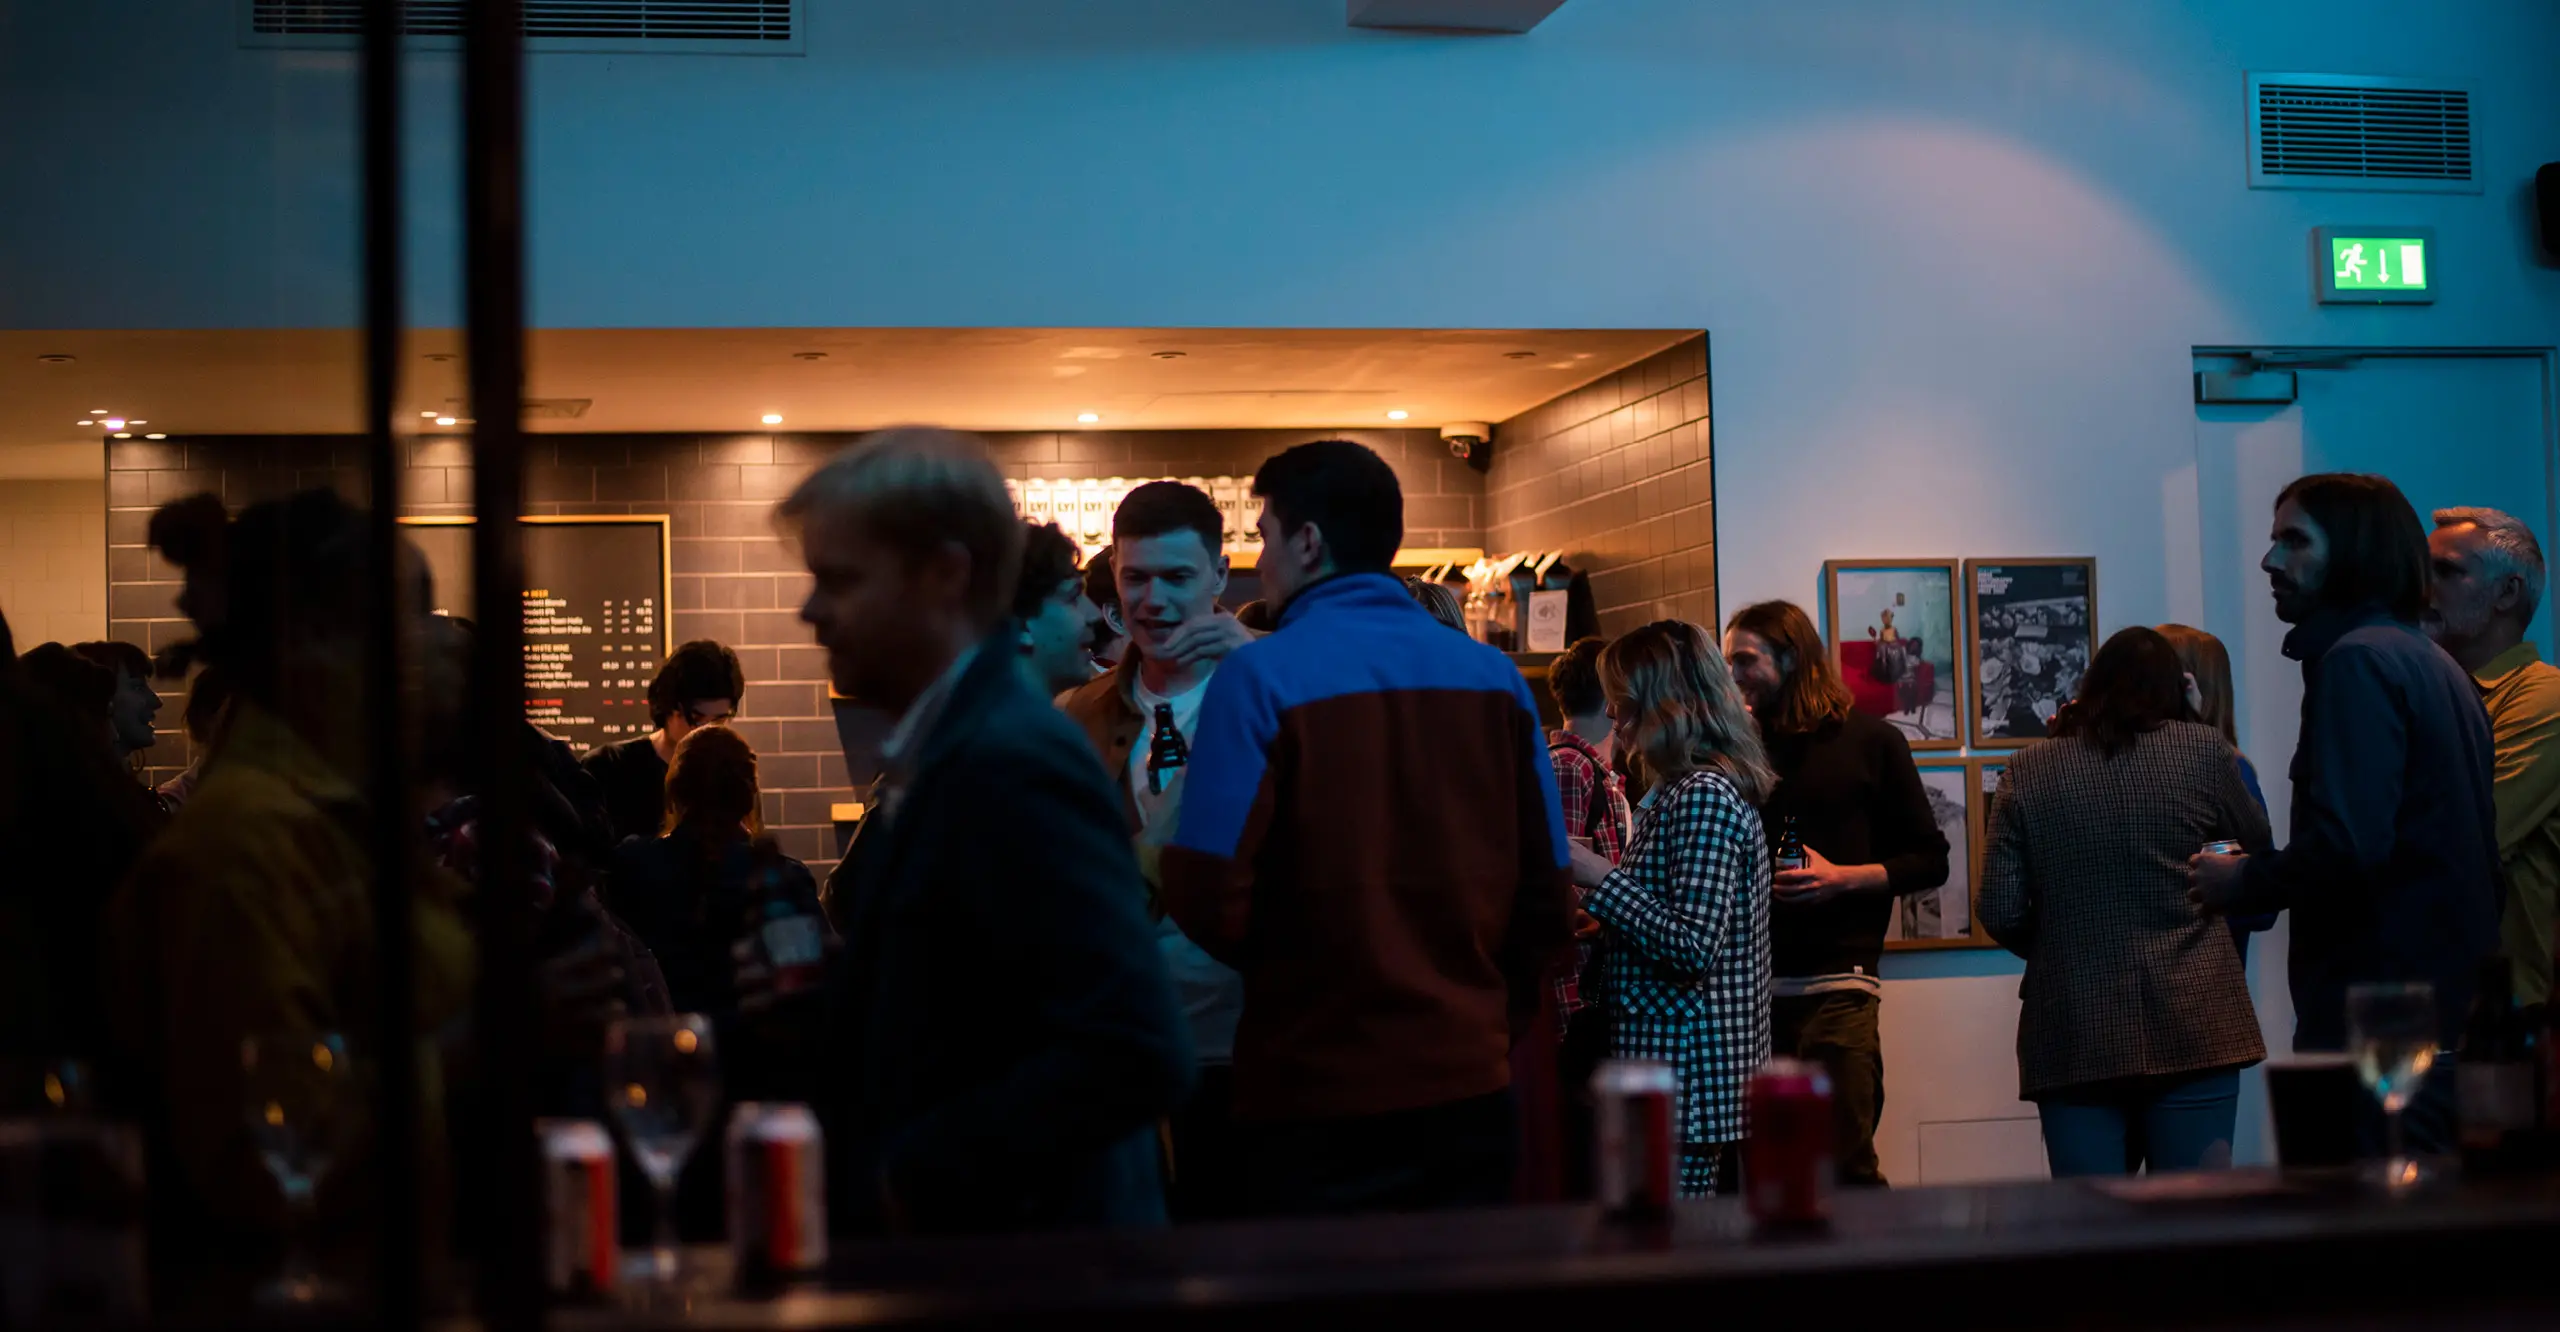 Group of people enjoying drinks at The Photographers Gallery's café bar